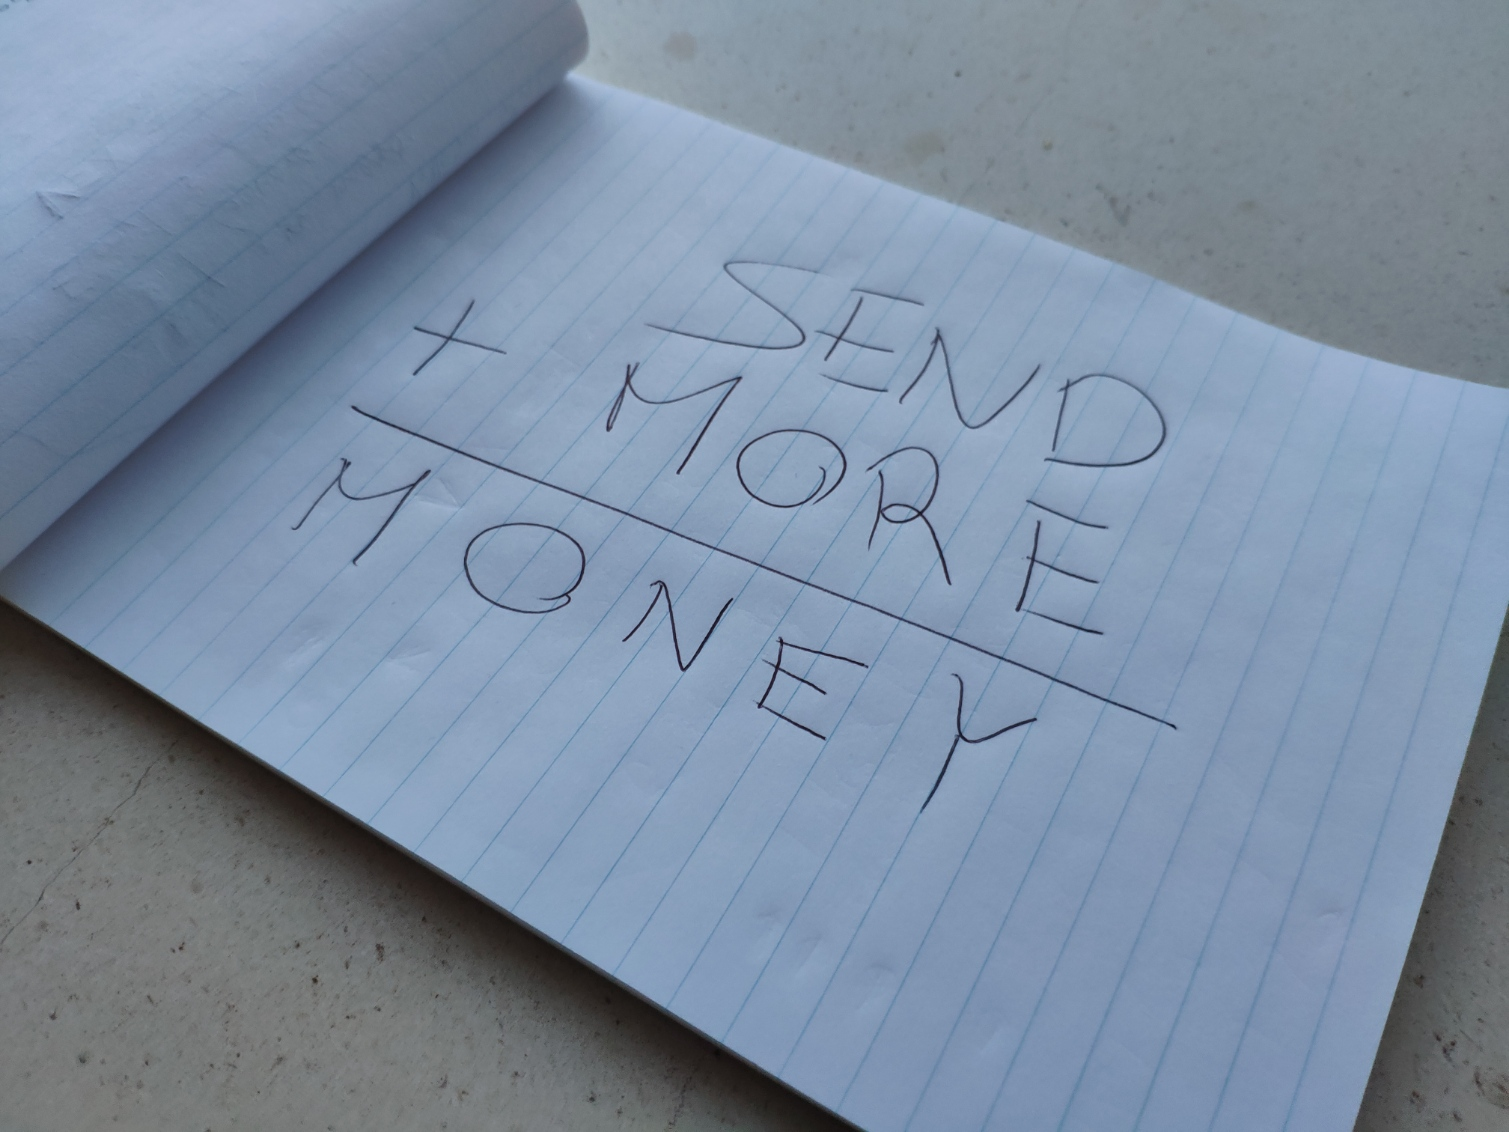 A piece of paper where one can read "SEND + MORE = MONEY".